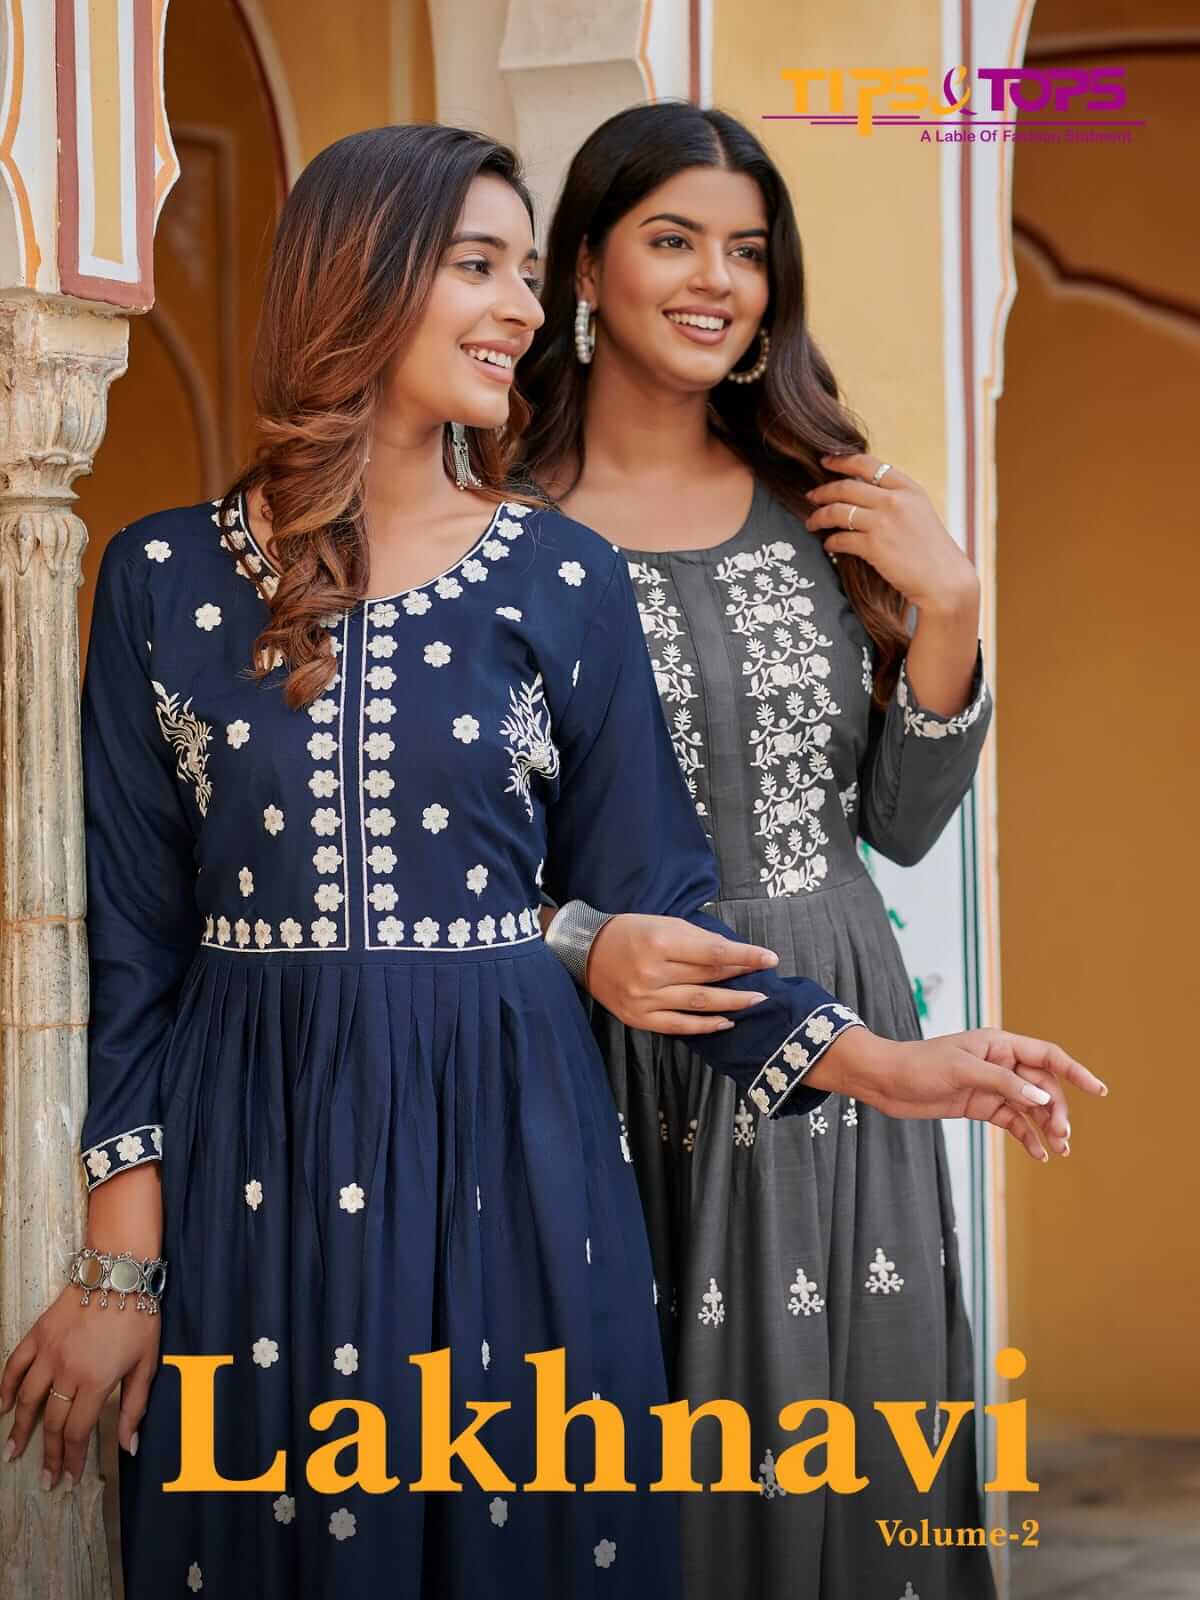 Tips and Tops Lakhnavi vol 2 Luckhnavi style Gowns Catalog in Wholesale, Buy Tips and Tops Lakhnavi vol 2 Luckhnavi style Gowns  Full Catalog in Wholesale Price